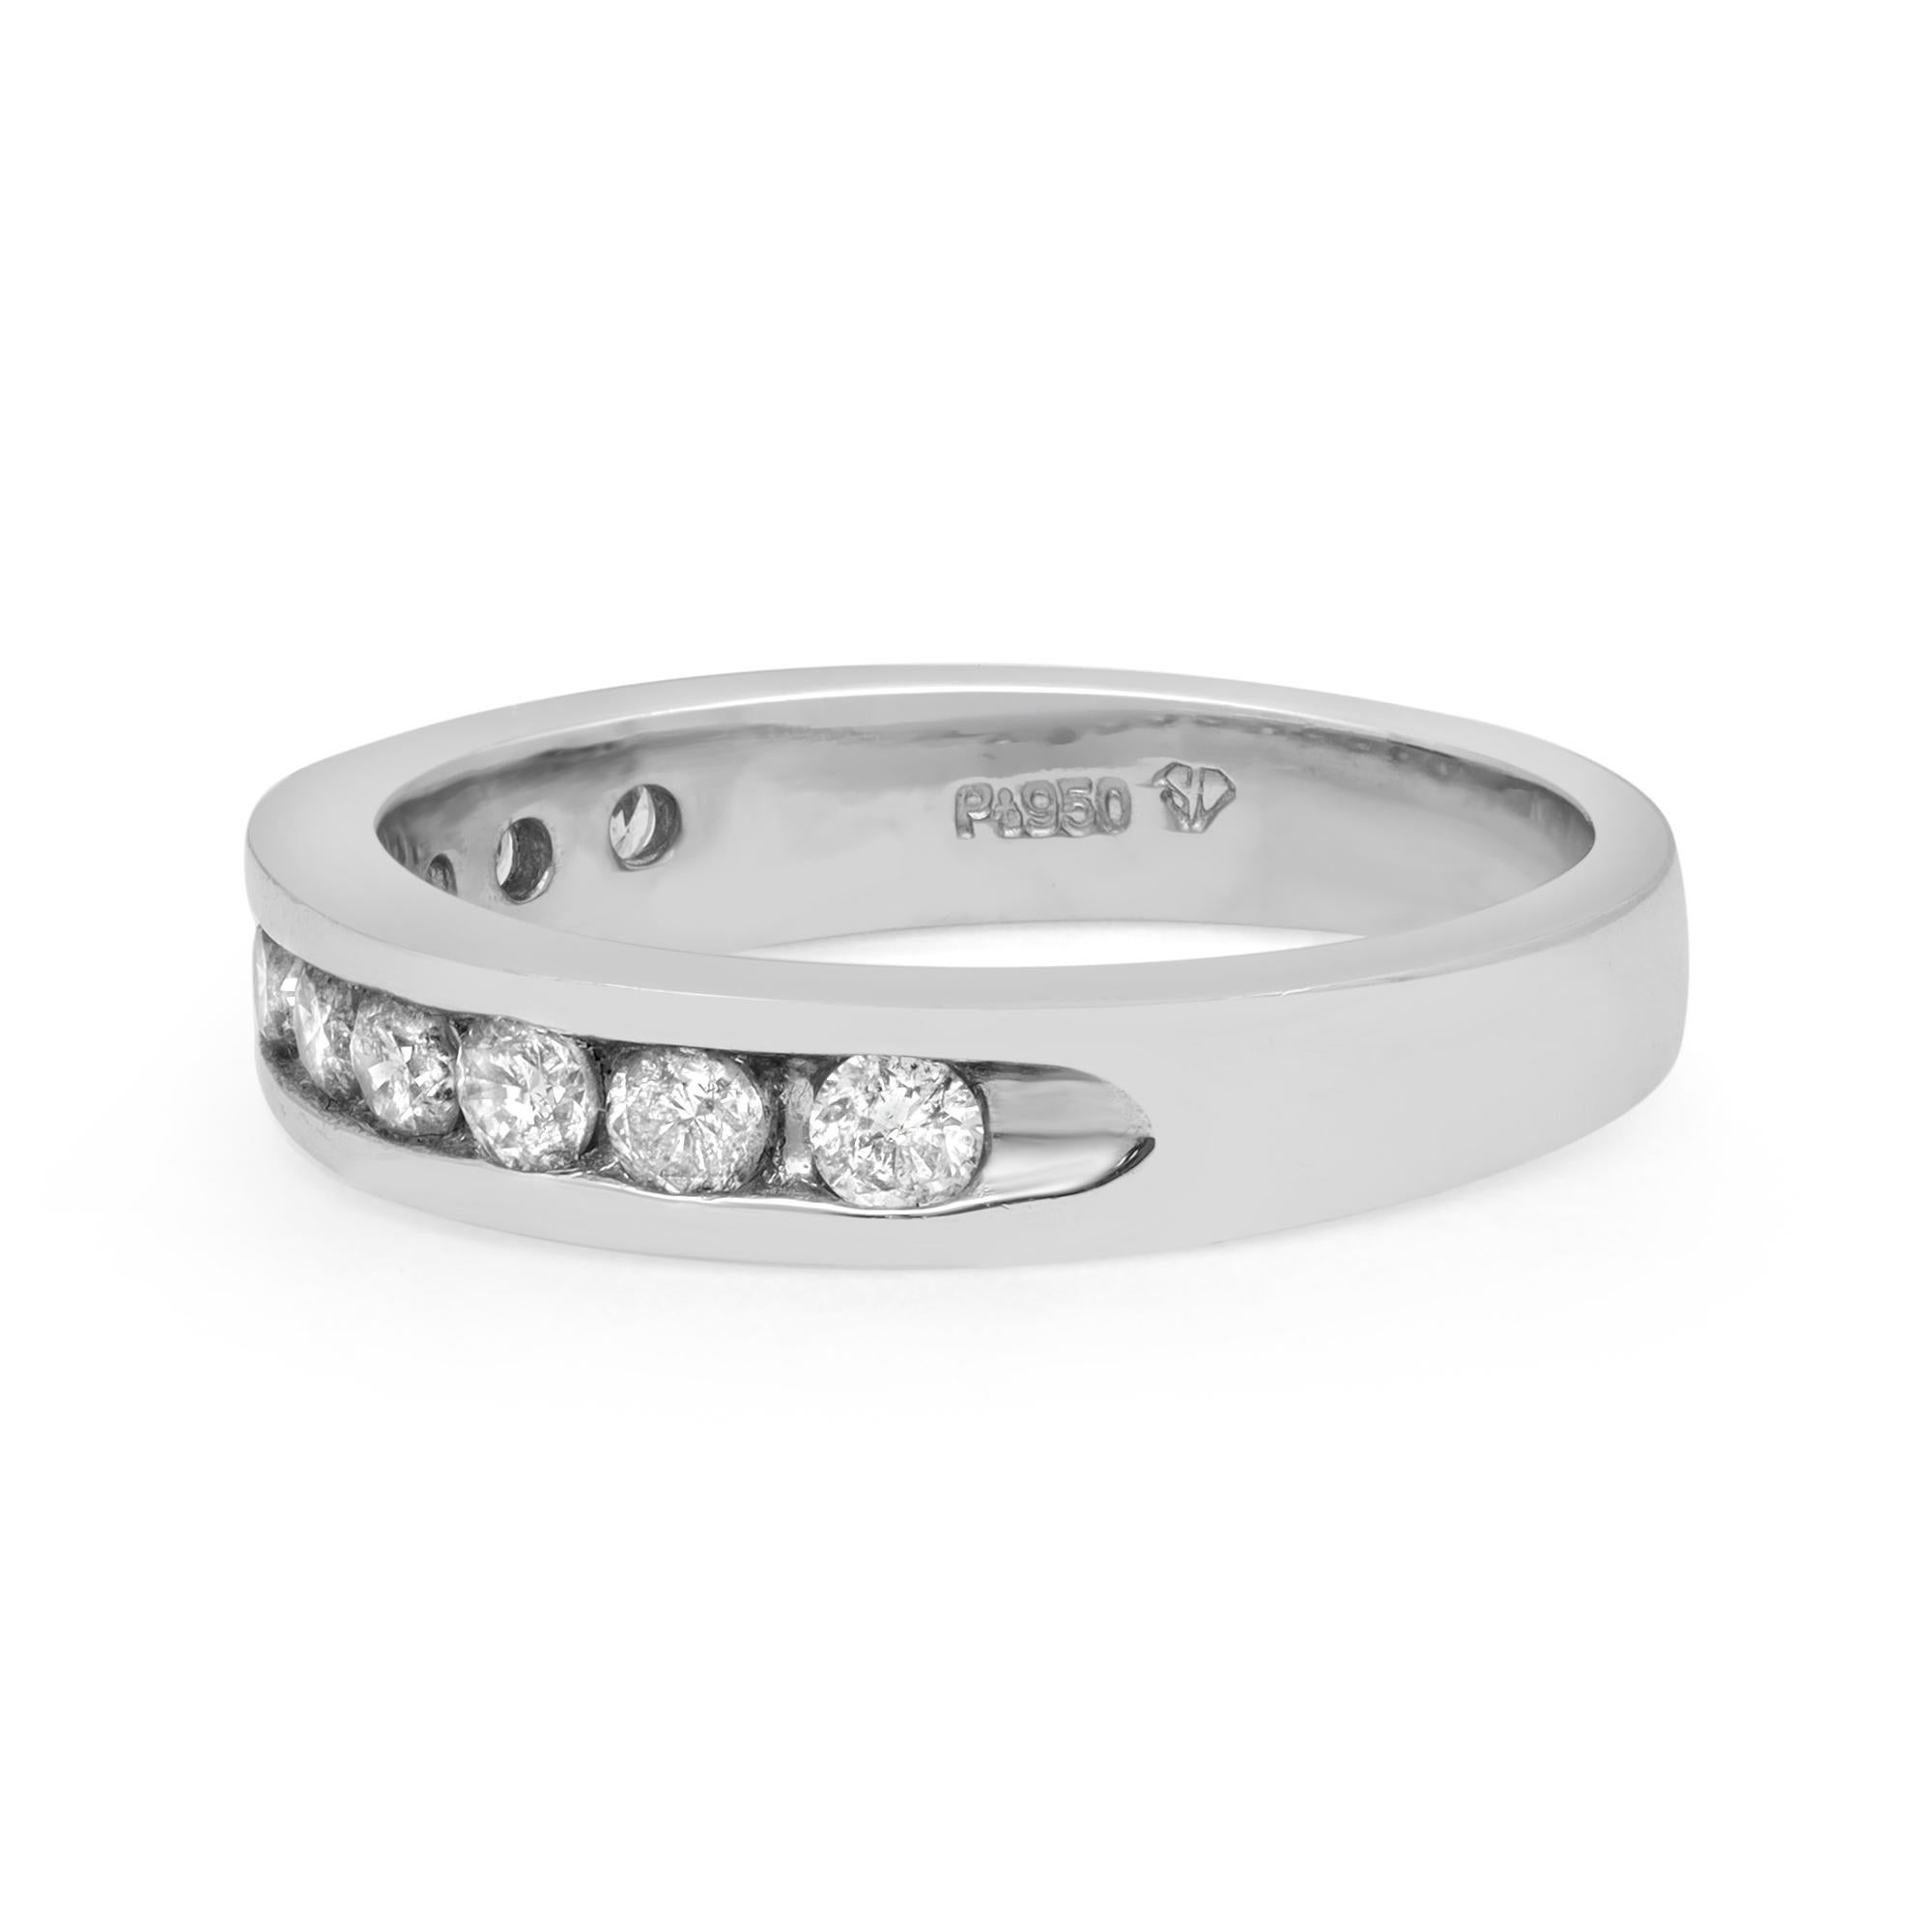 This beautiful diamond wedding band ring is a perfect fit for any occasion. Crafted in fine high polished platinum. It features 10 channel set round brilliant cut diamonds weighing 0.50 carat encrusted halfway through the band. Diamond color H-I and